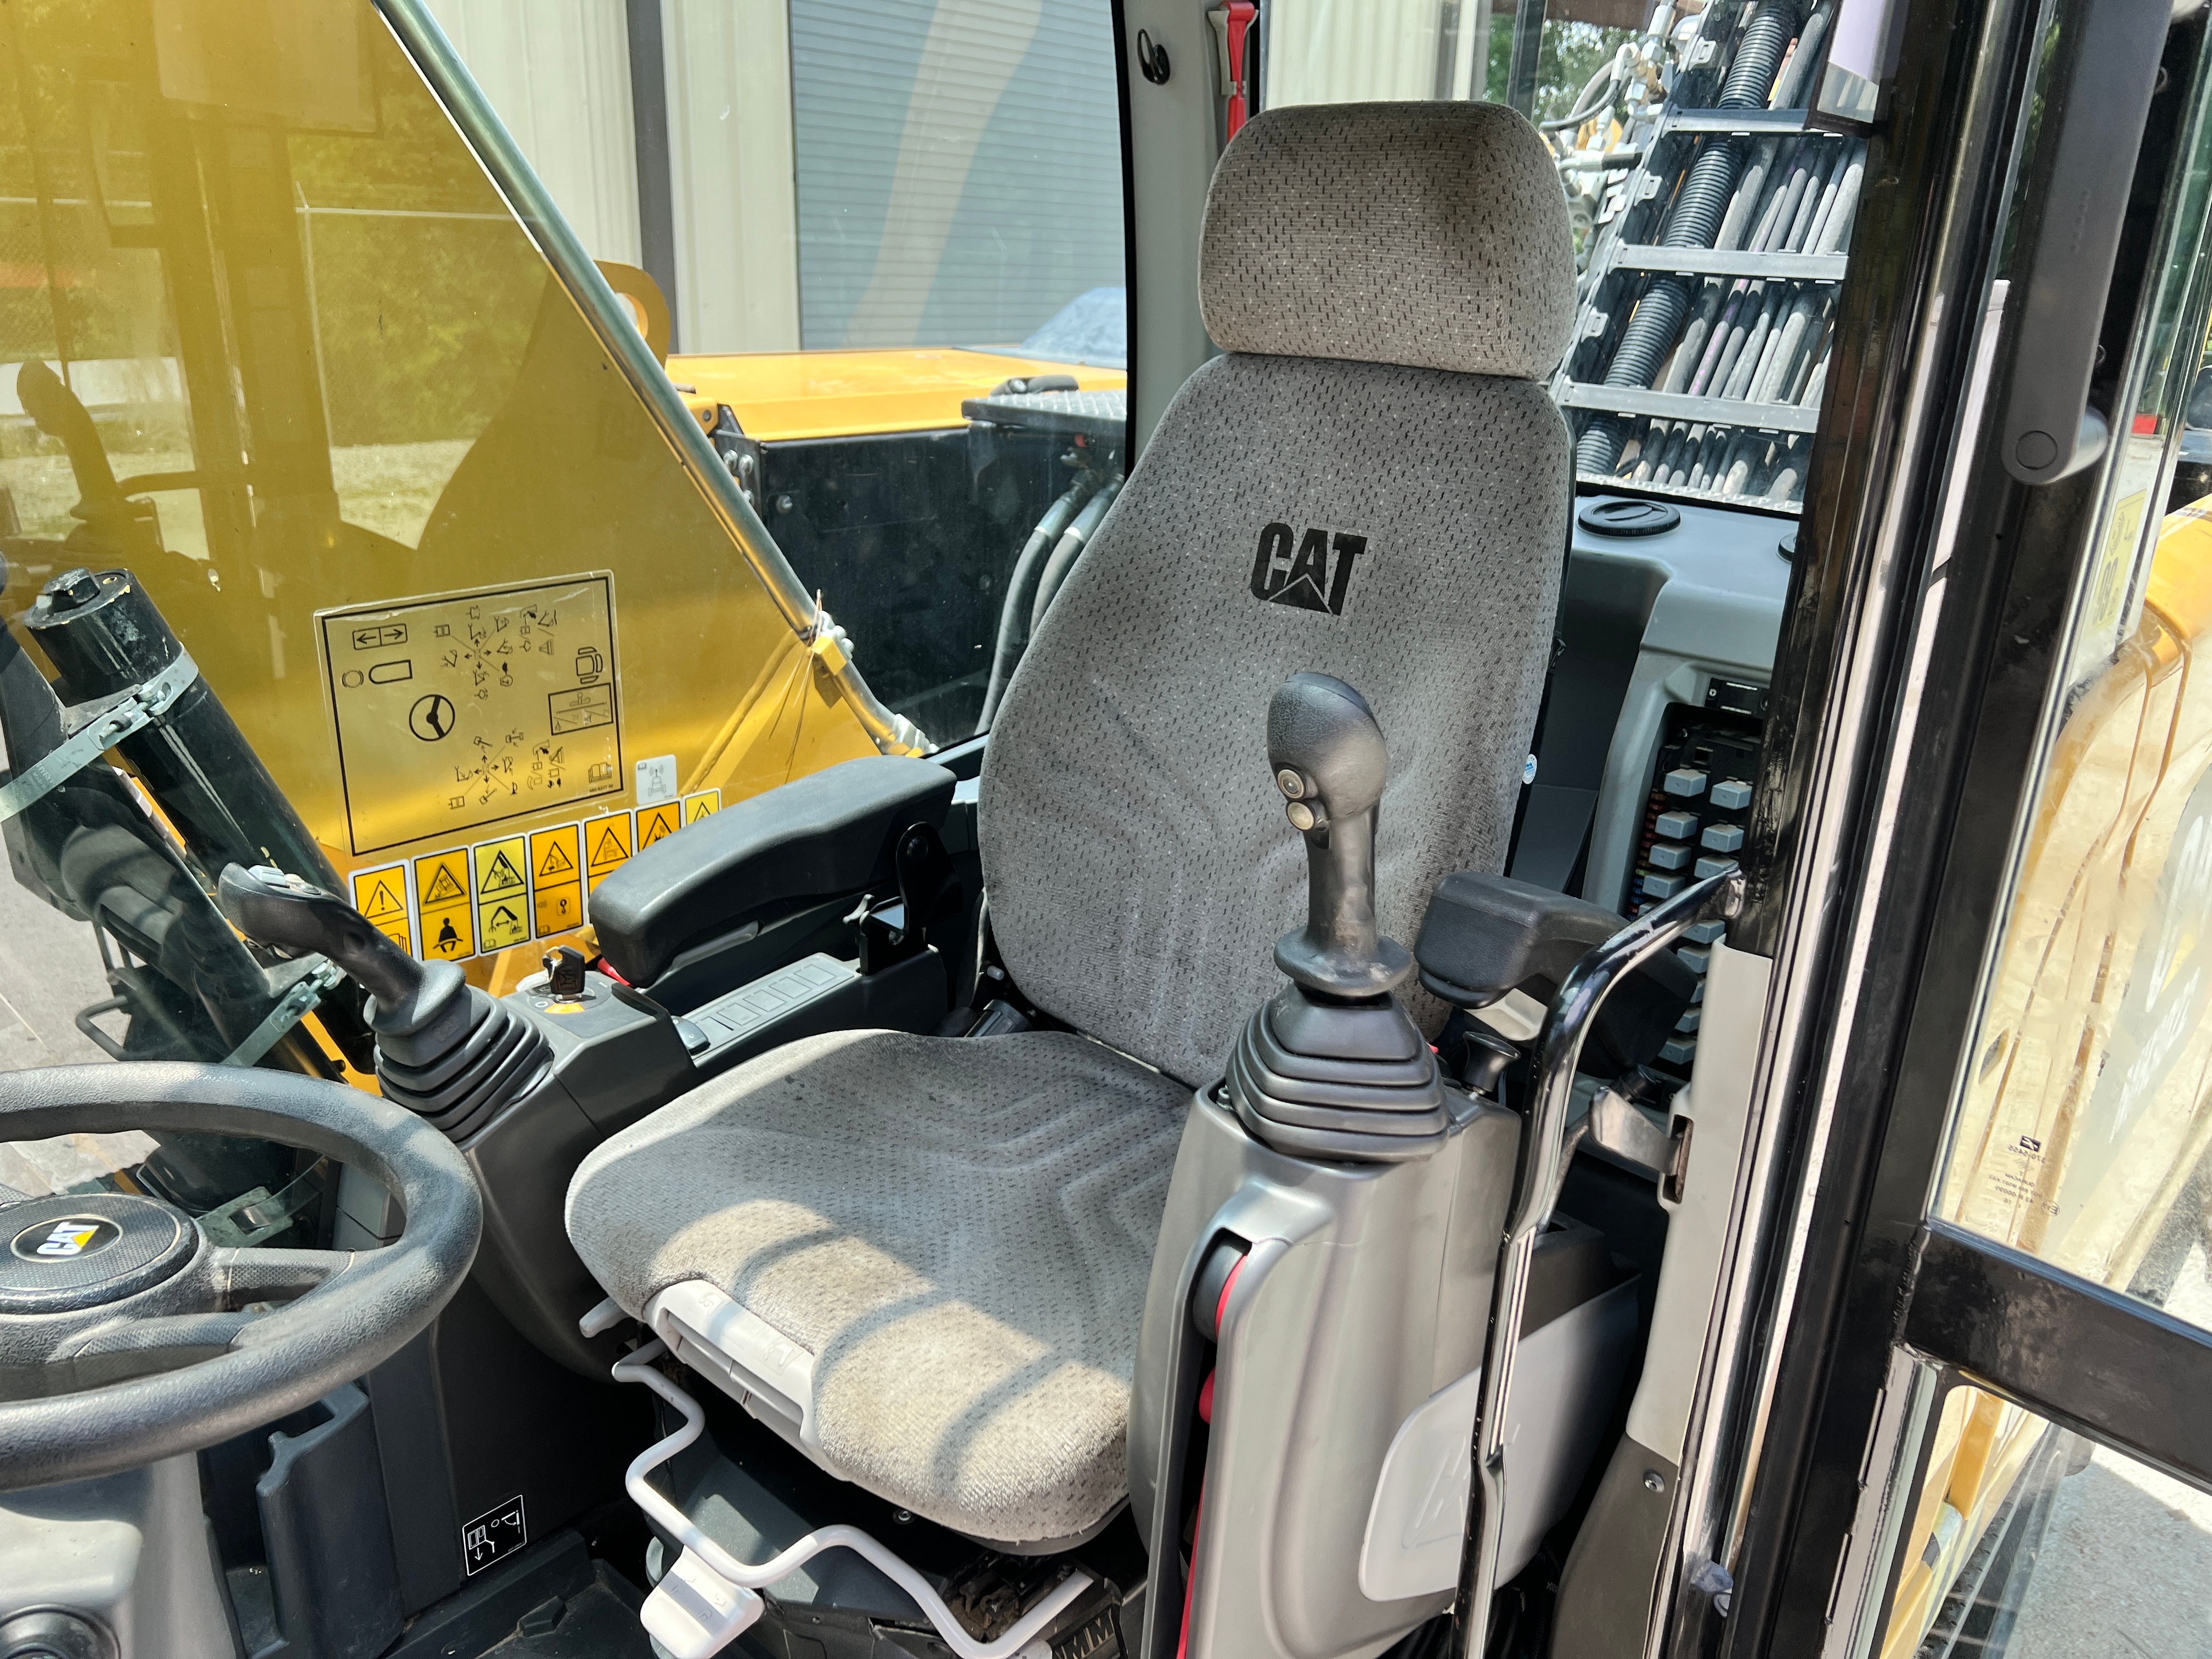 Used 2017 Caterpillar MH3022 For Sale